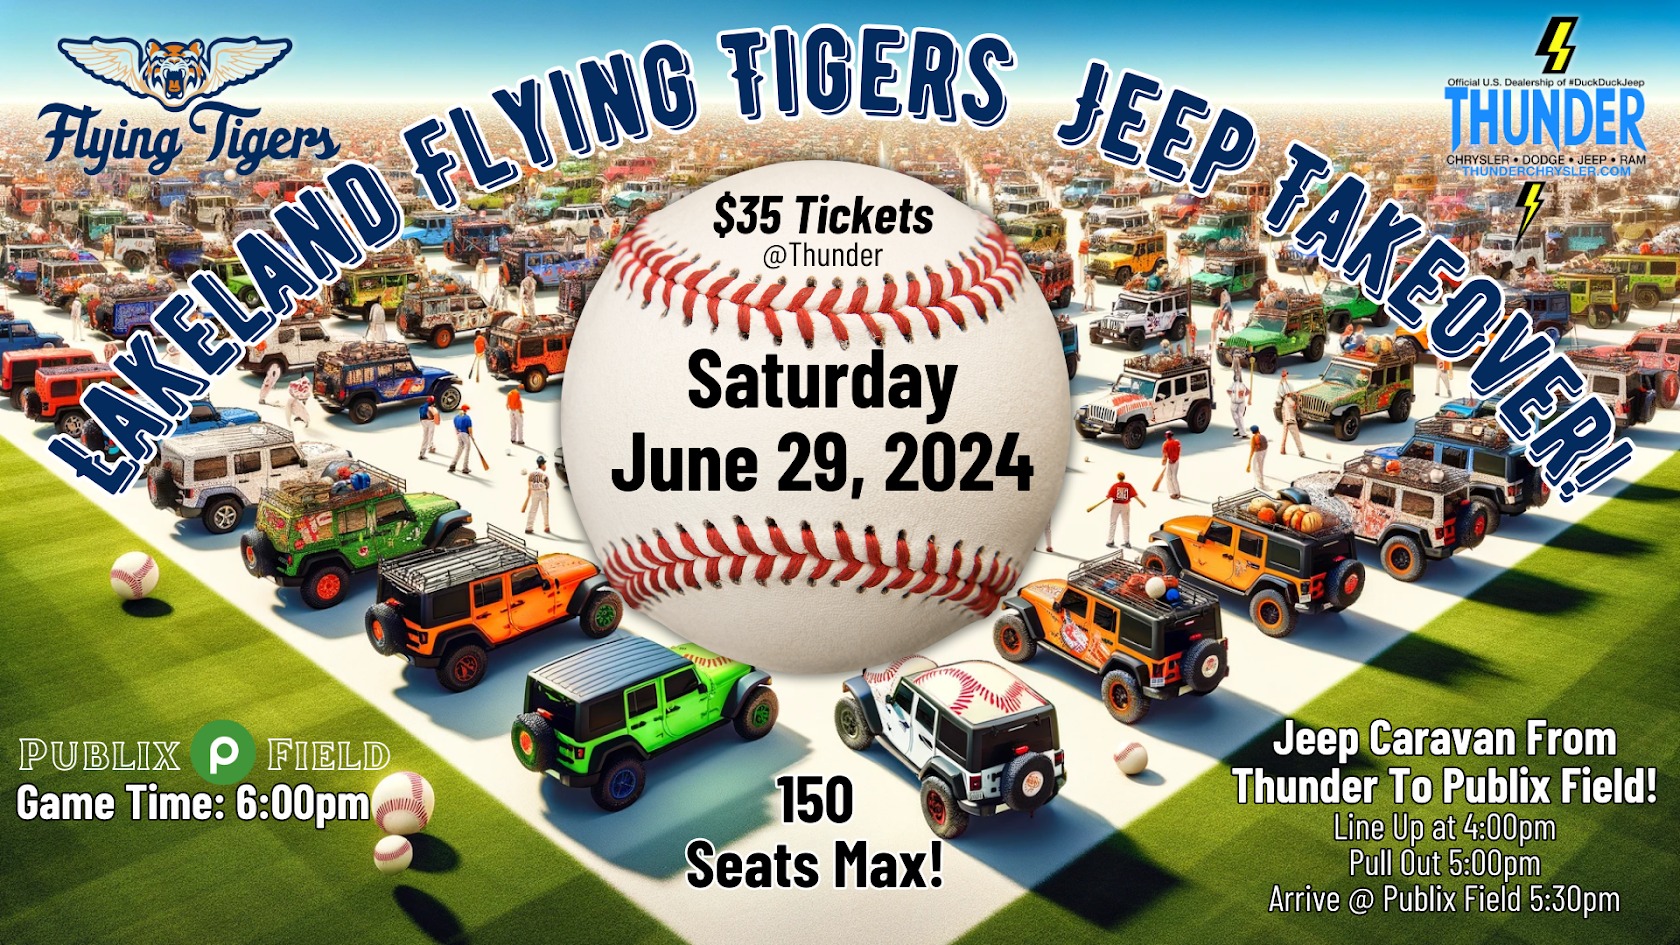 Lakeland Flying Tigers Jeep Take Over